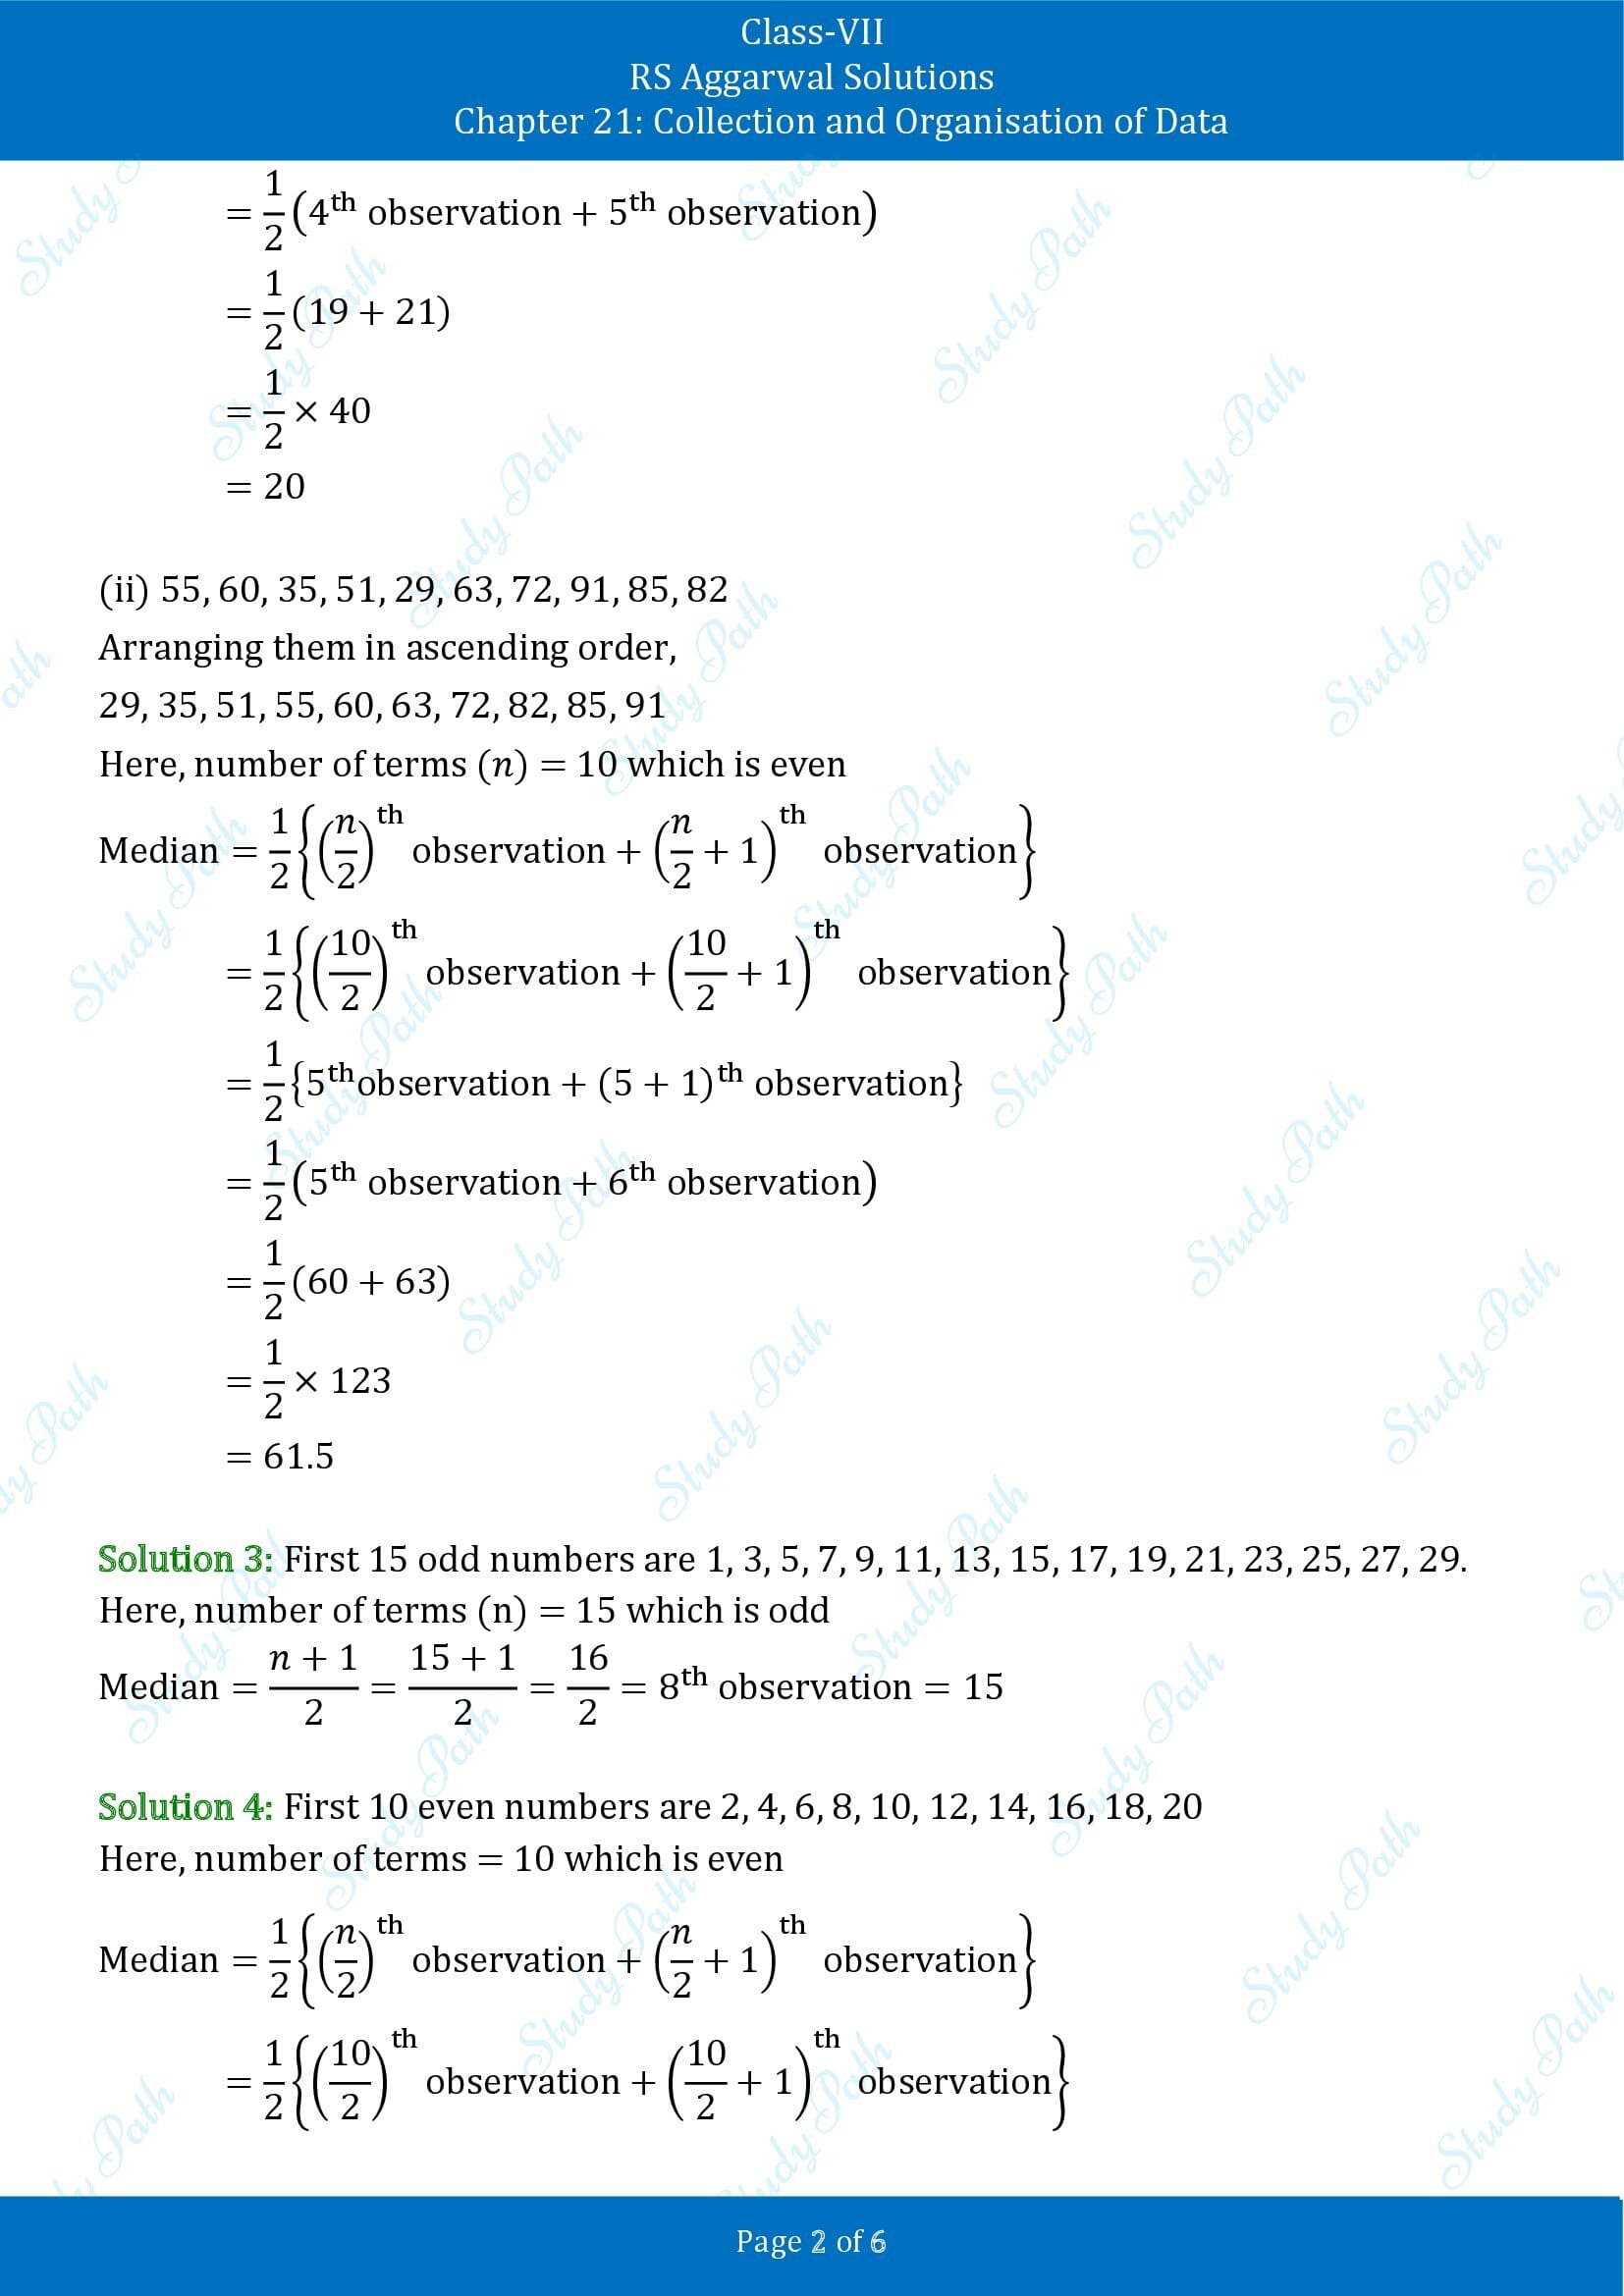 RS Aggarwal Solutions Class 7 Chapter 21 Collection and Organisation of Data Exercise 21B 00002